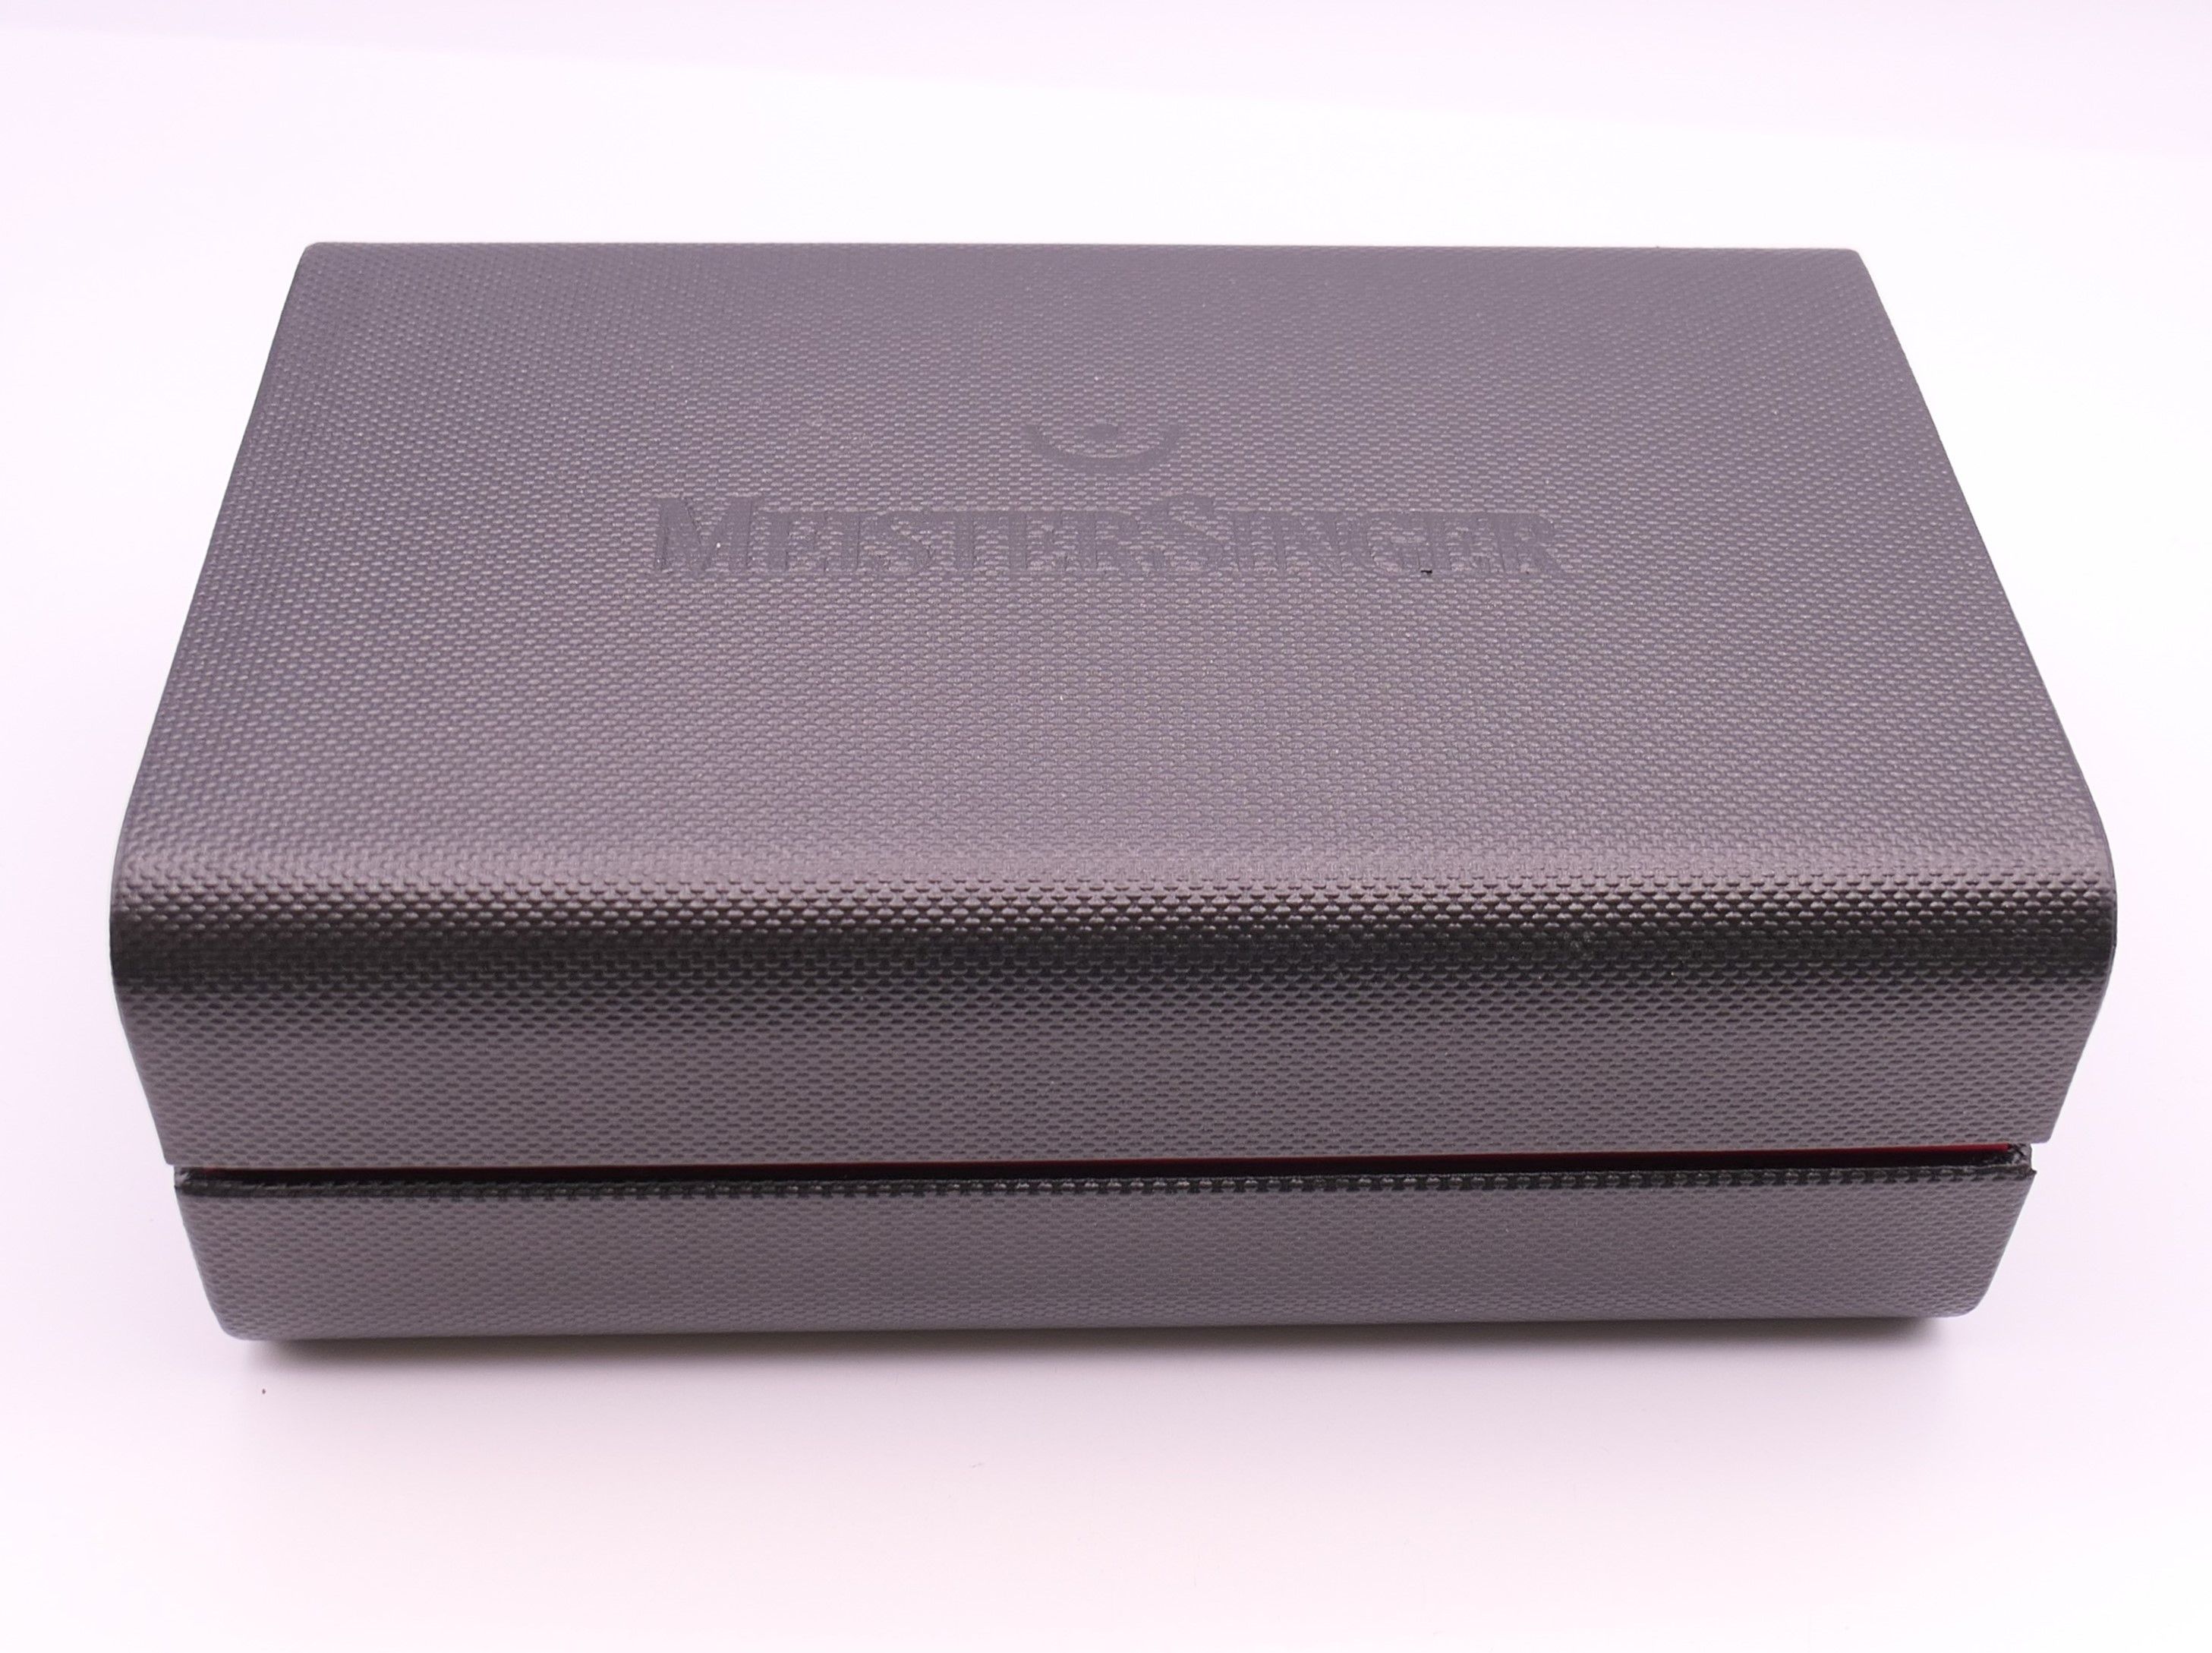 A boxed limited edition Meistersinger Perigraph gentleman's wristwatch. 4.5 cm wide. - Image 17 of 20